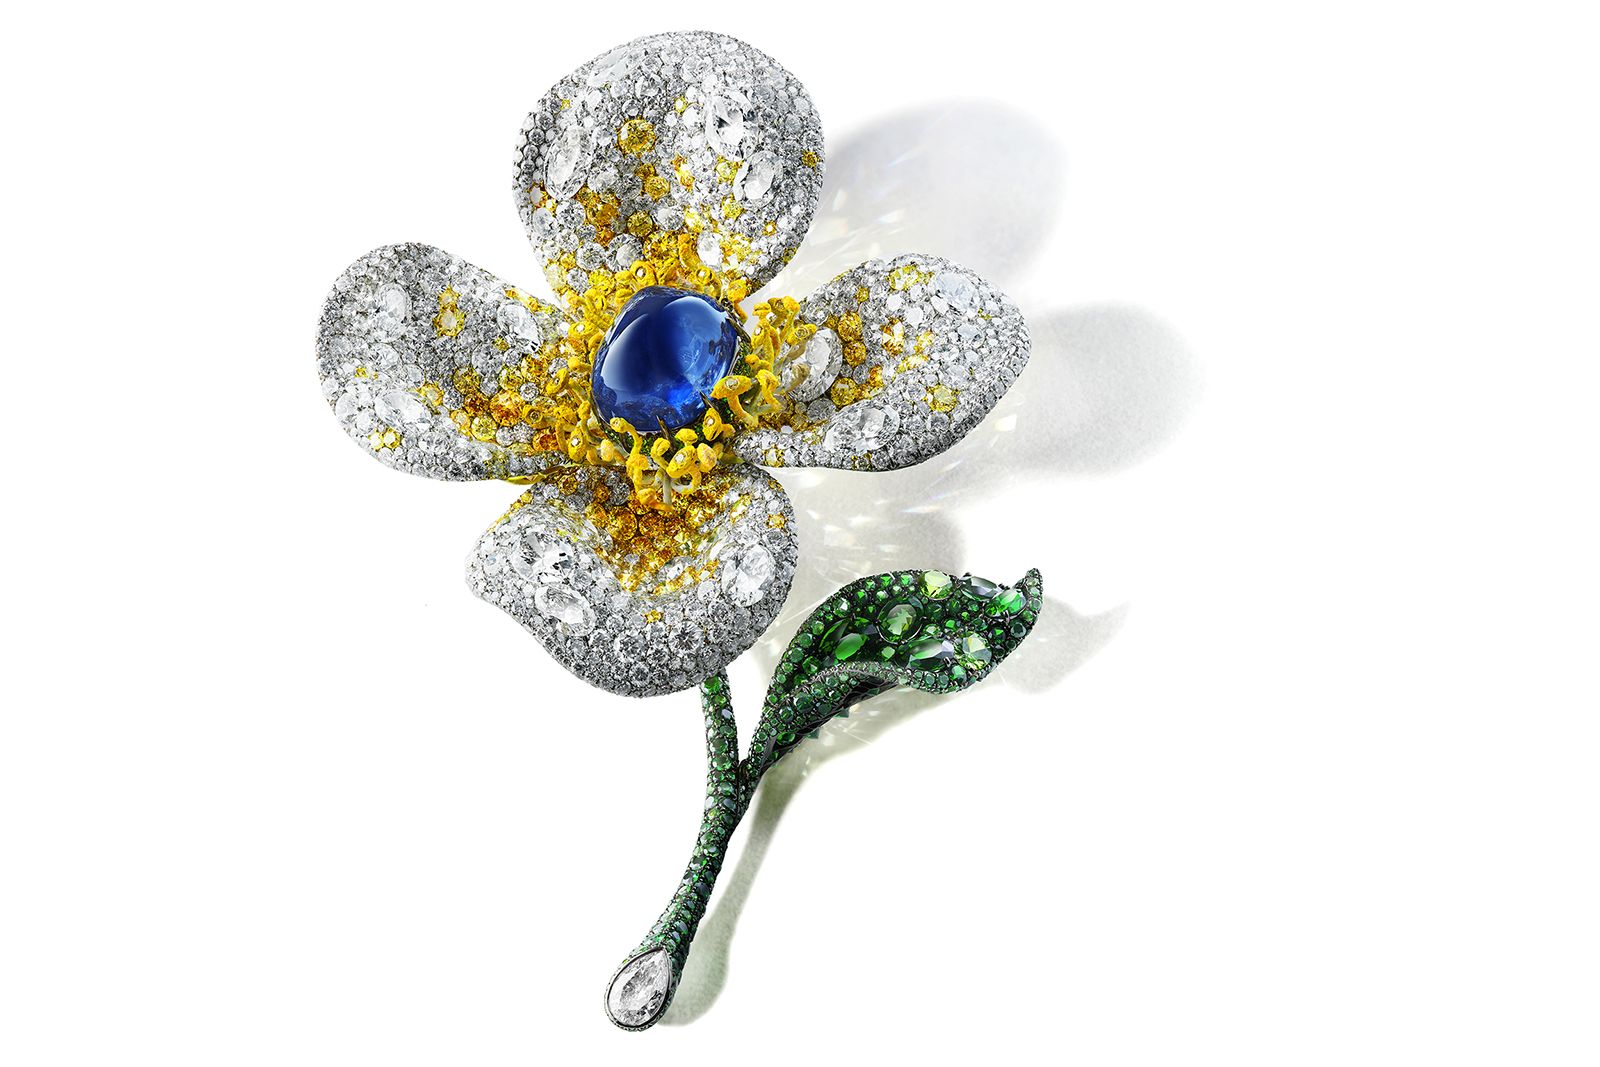 Cindy Chao Sapphire Floral brooch with a 32.11 carat untreated Burmese sapphire